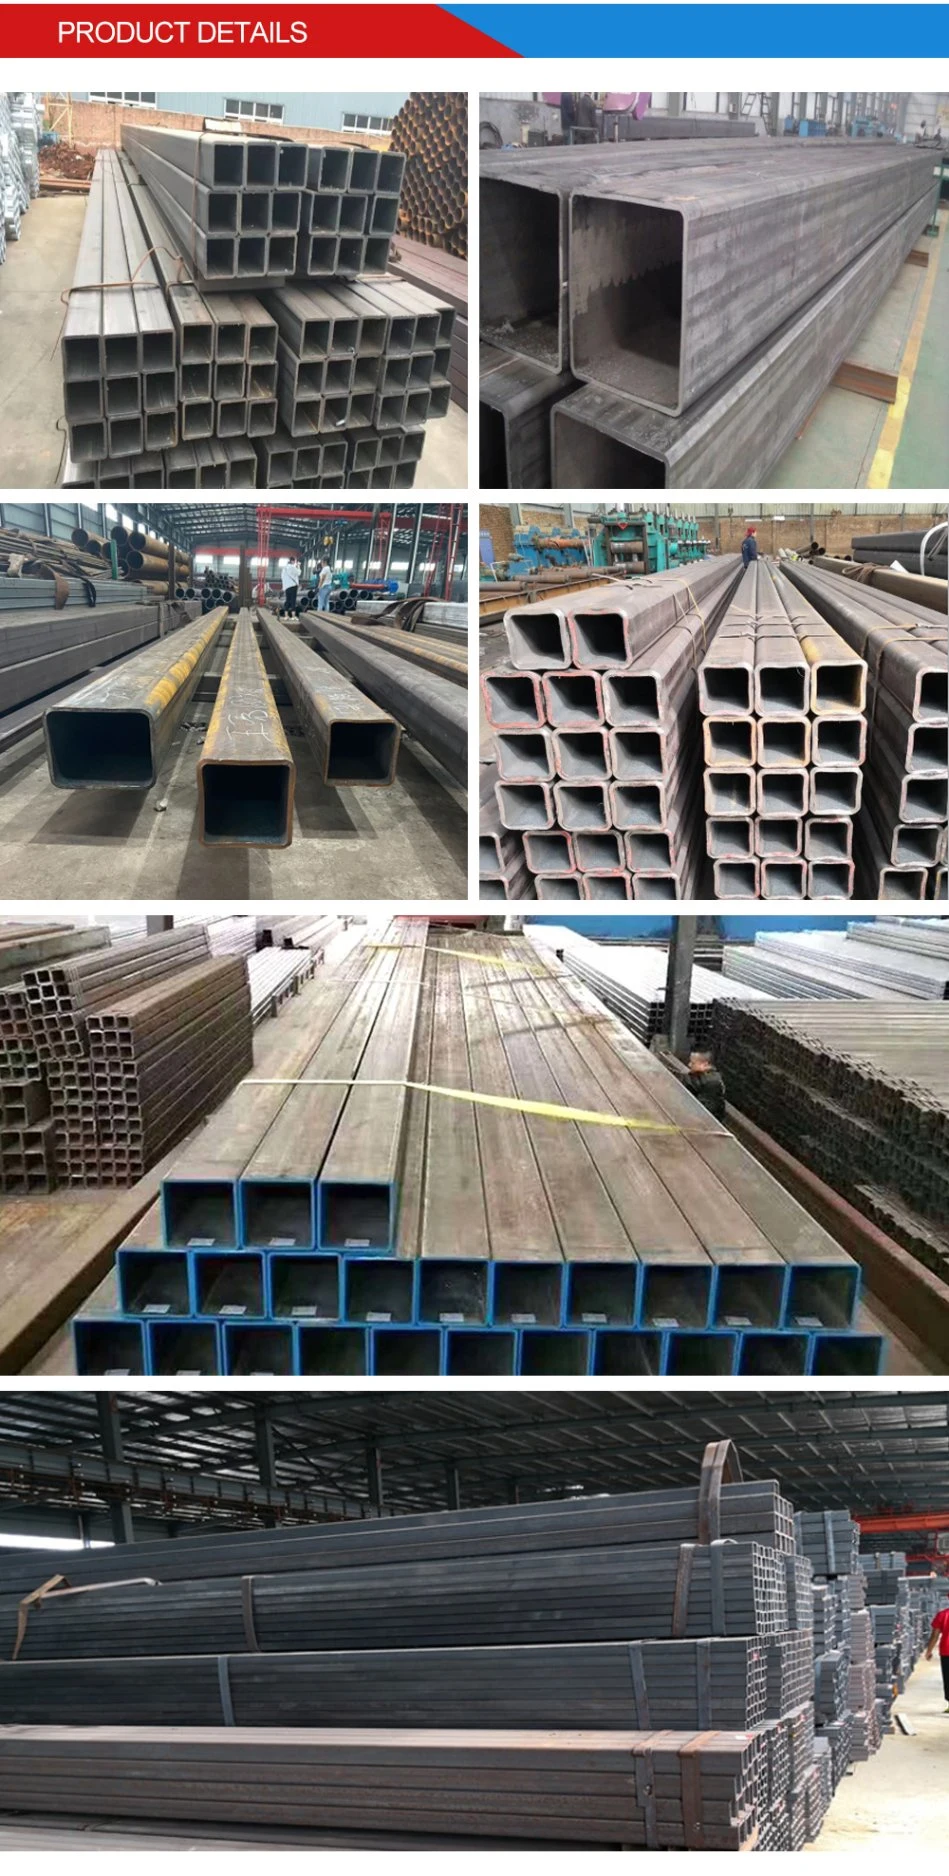 Iron and Steel Hollow Section Square Tube Carbon Steel Square Pipe